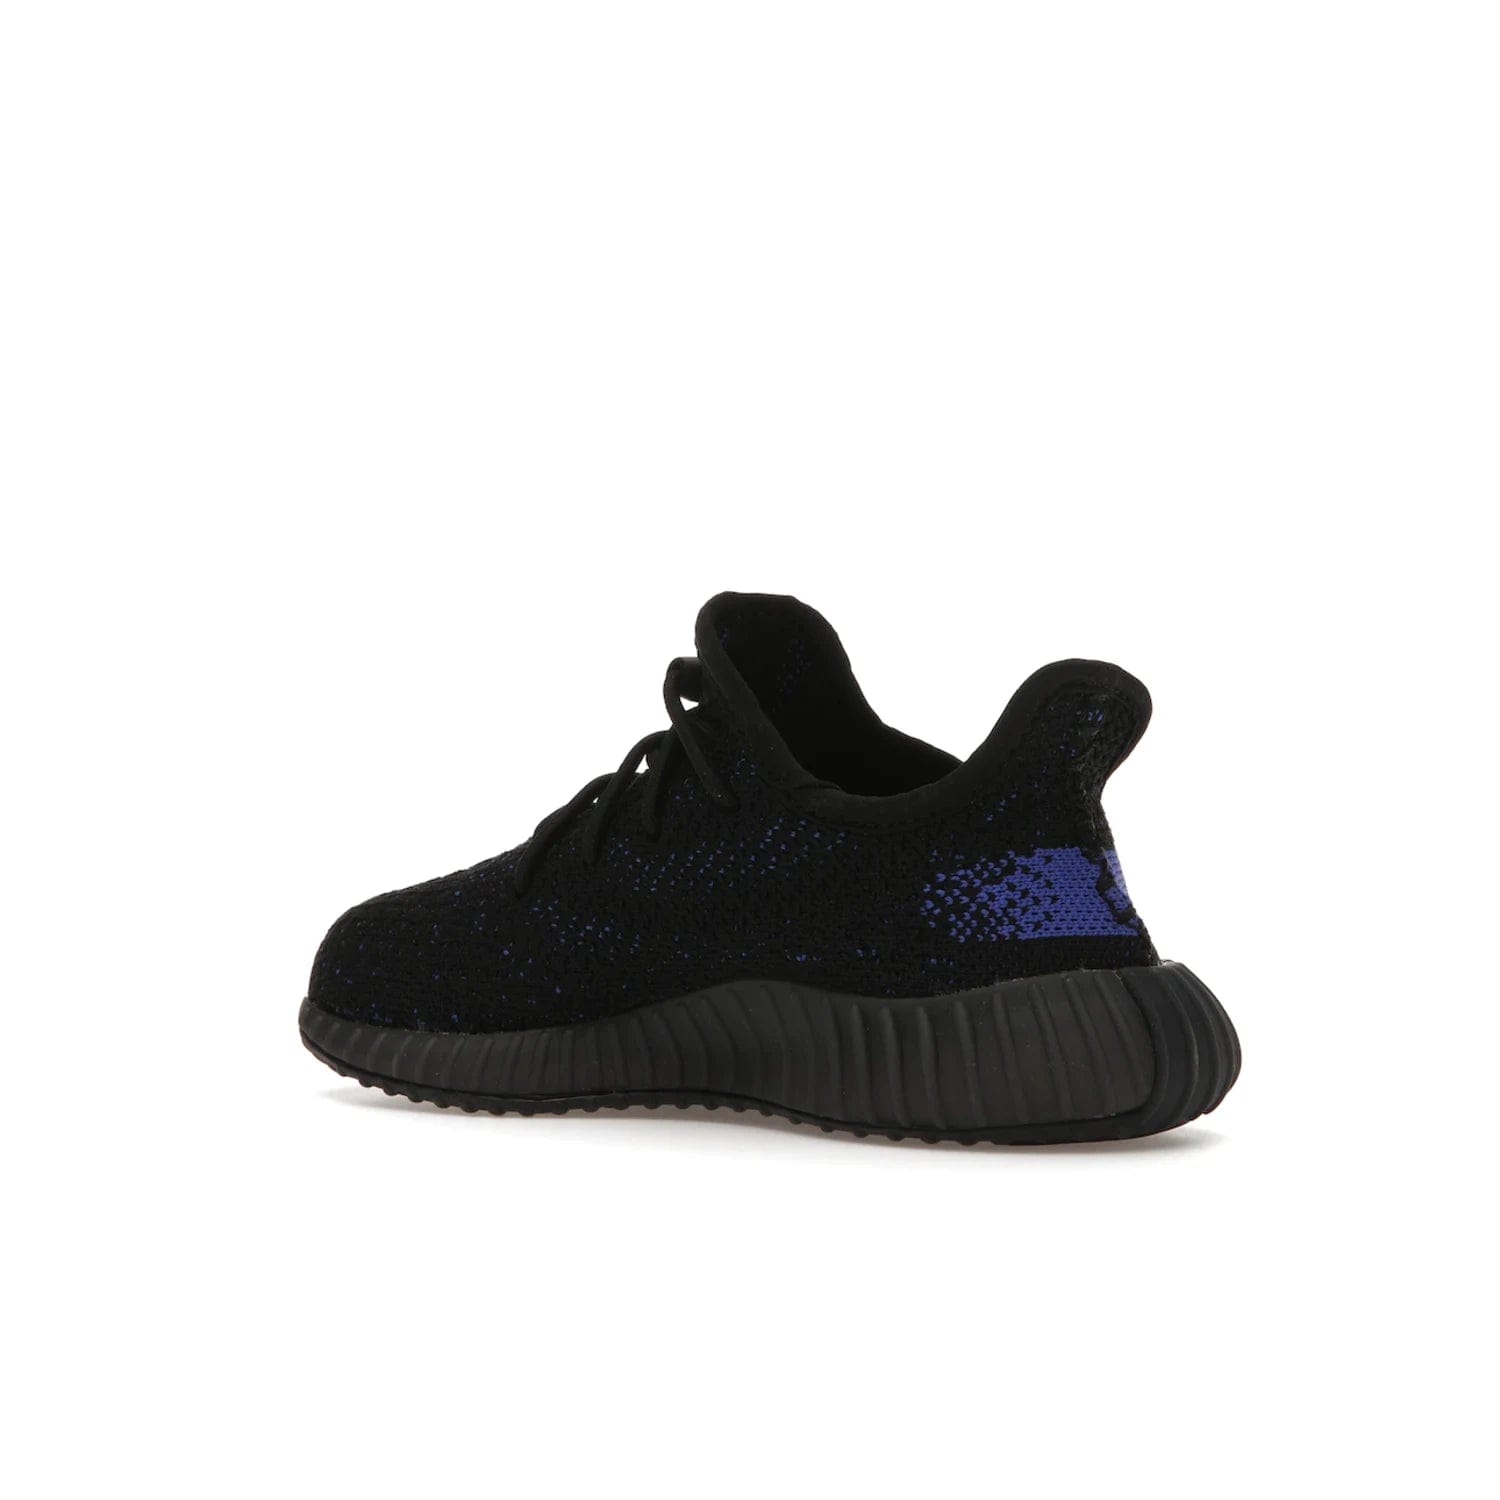 adidas Yeezy Boost 350 V2 Dazzling Blue (Kids) - Image 23 - Only at www.BallersClubKickz.com - Shop the adidas Yeezy Boost 350 V2 Dazzling Blue (Kids). Features a black Primeknit upper with a royal blue 'SPLY-350' streak and a full-length Boost midsole. Durable rubber outsole provides plenty of traction. Available for $160.